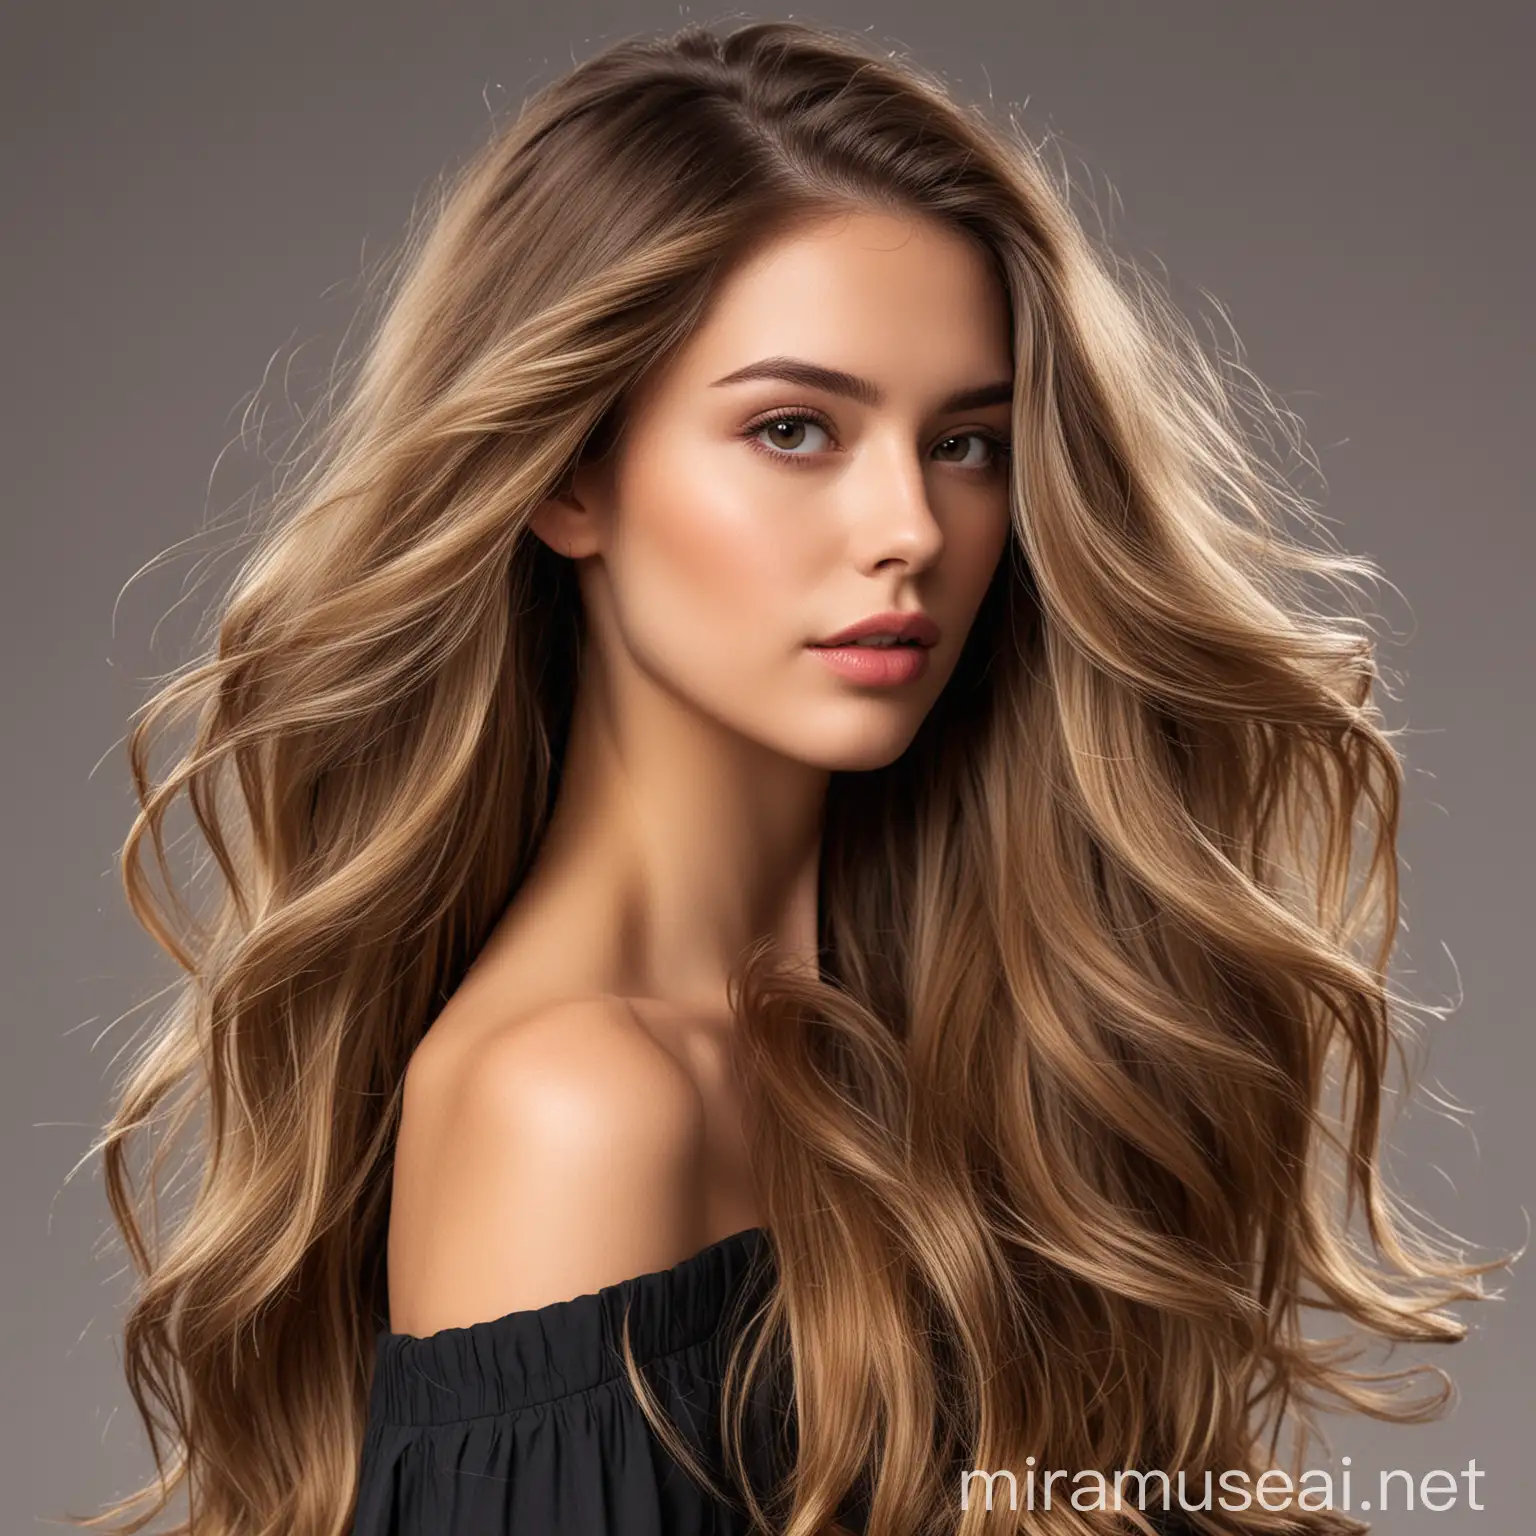 Perfil model with spectacular long balayage hair